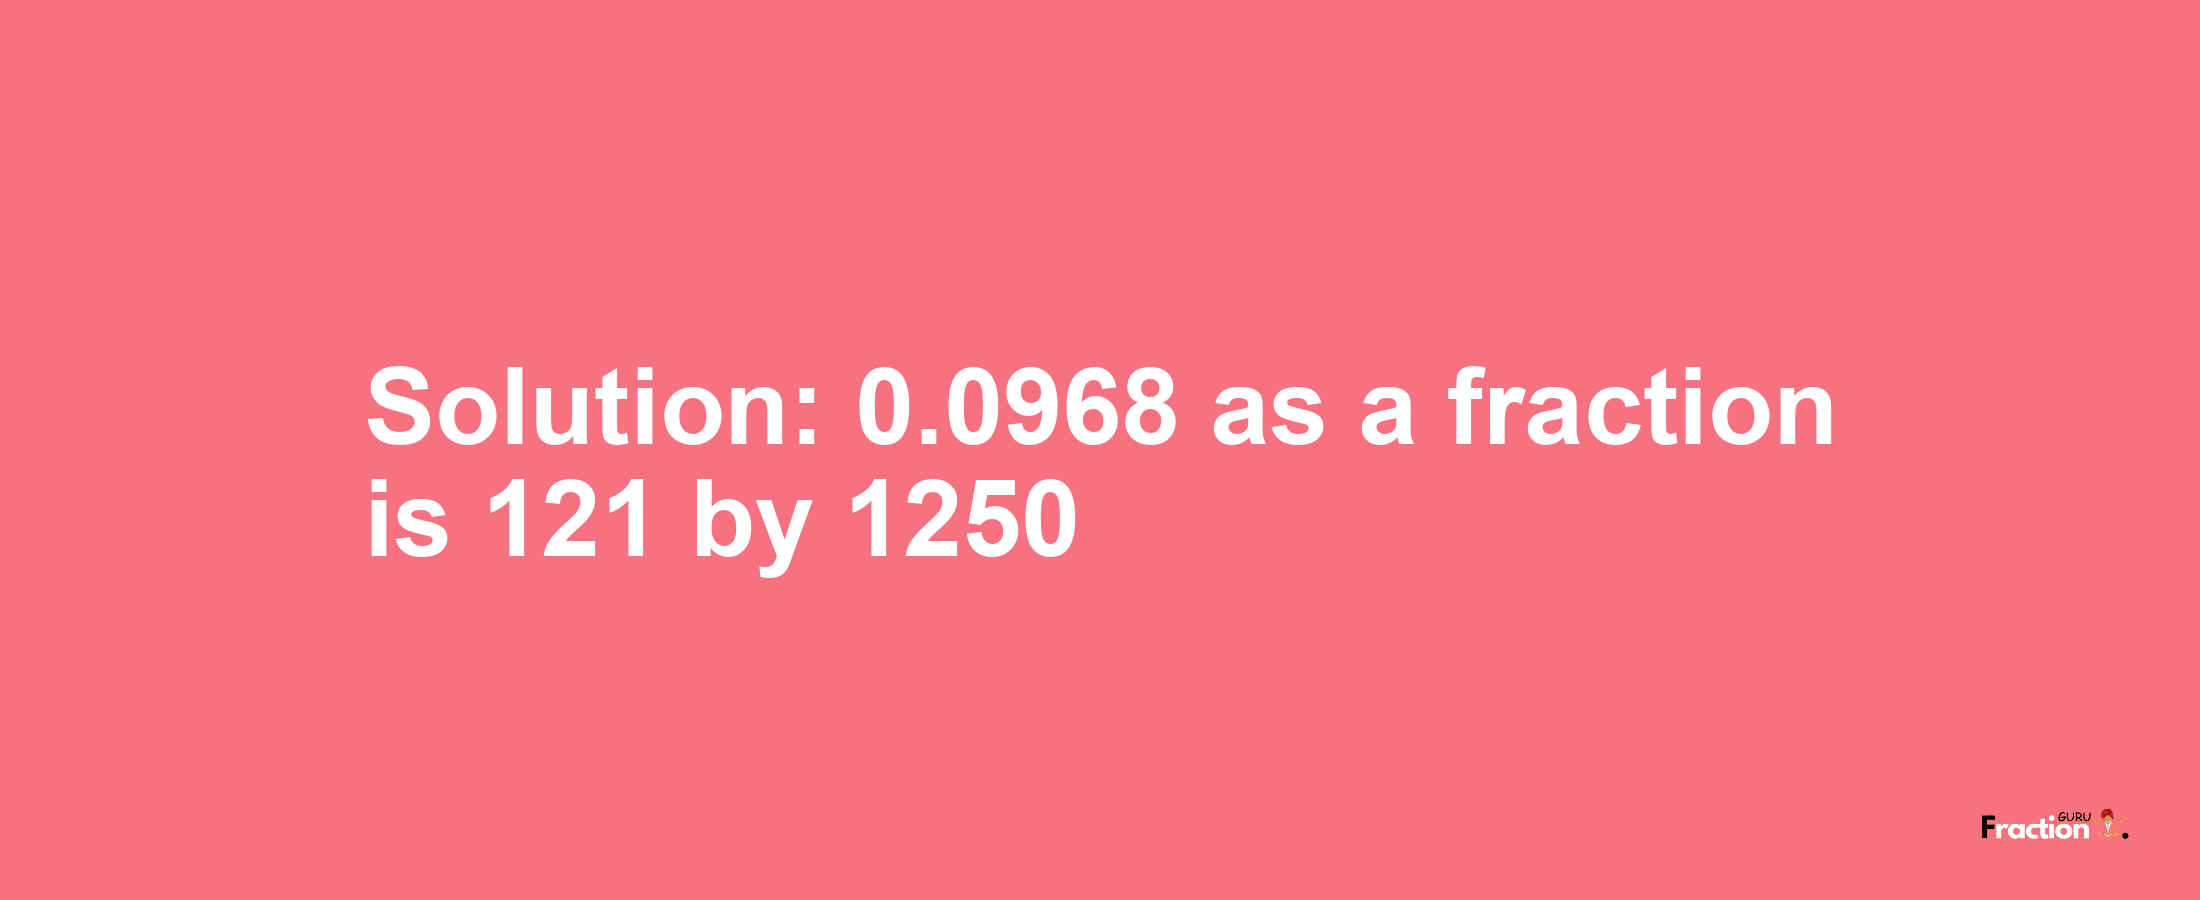 Solution:0.0968 as a fraction is 121/1250